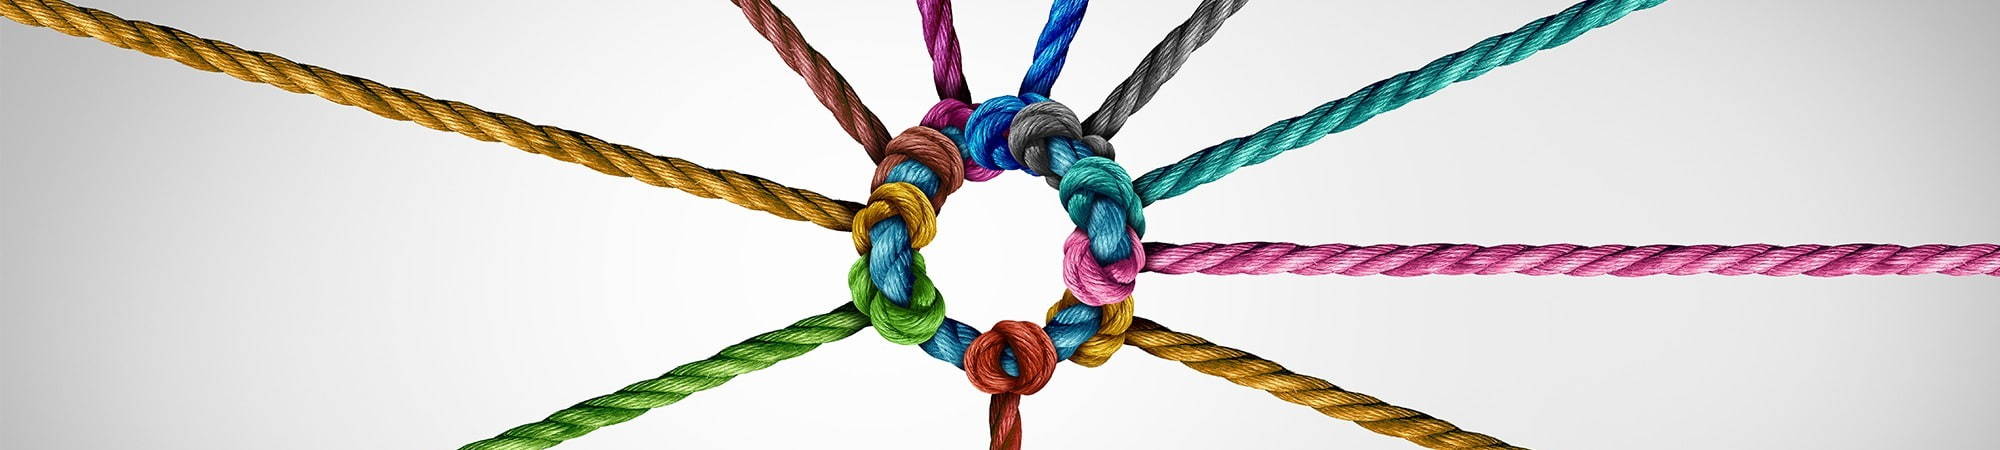 Multicolour knots joining together. Join I.T. Recruitment. TheDriveGroup